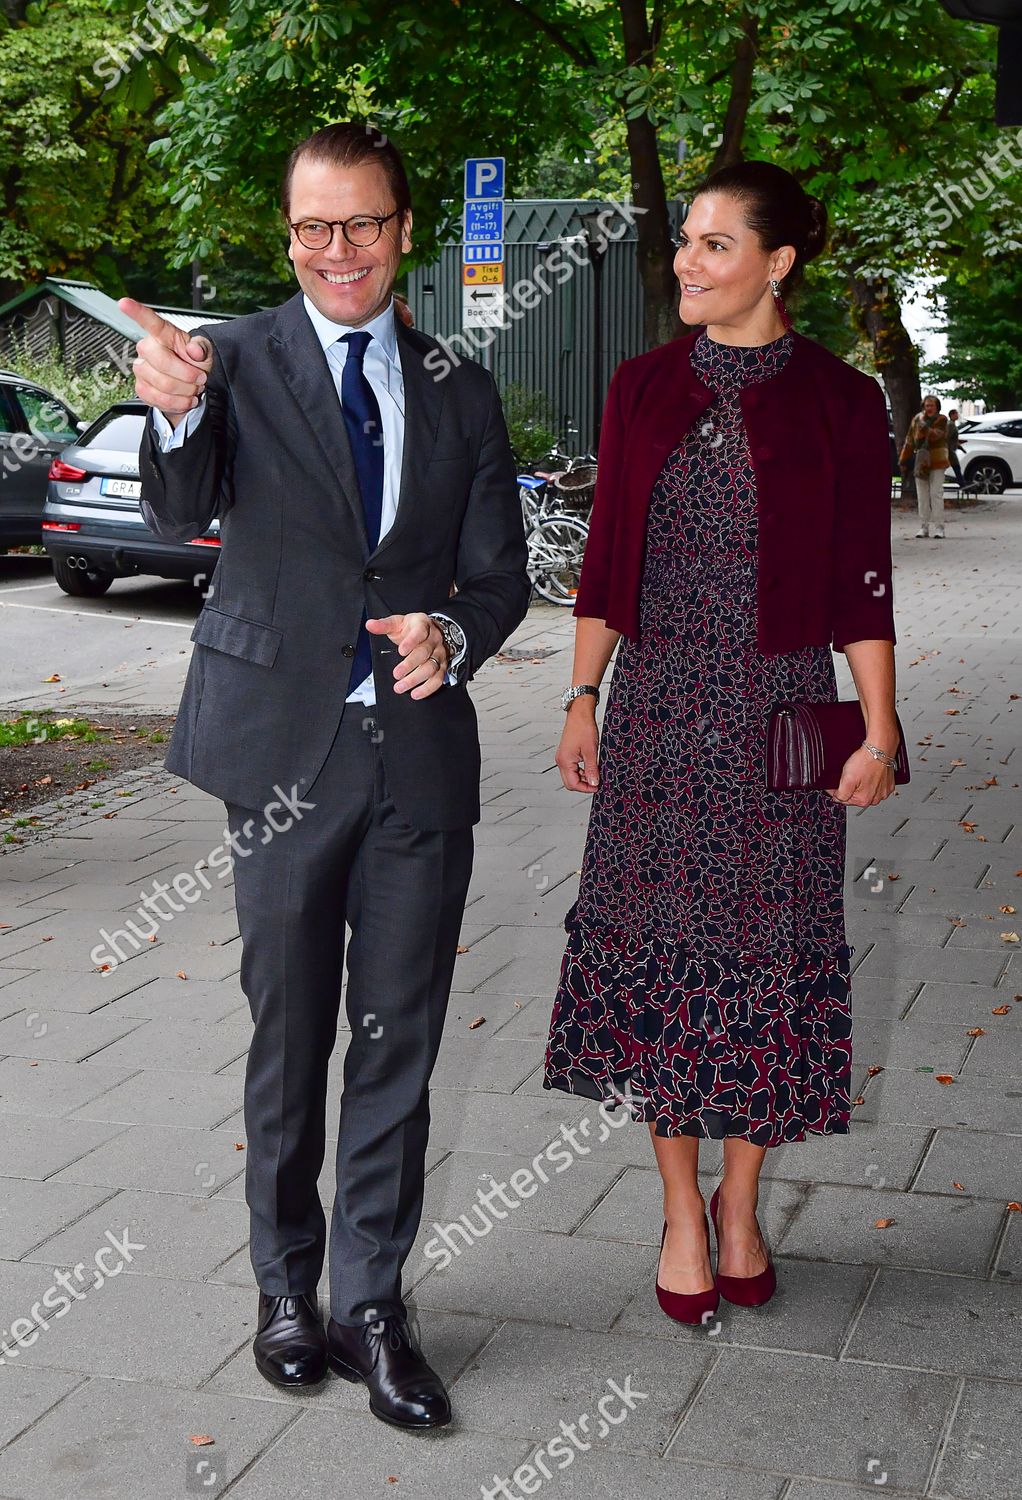 prince-daniel-and-crown-princess-victoria-visit-the-maxim-theater-stockholm-sweden-shutterstock-editorial-10817556j.jpg